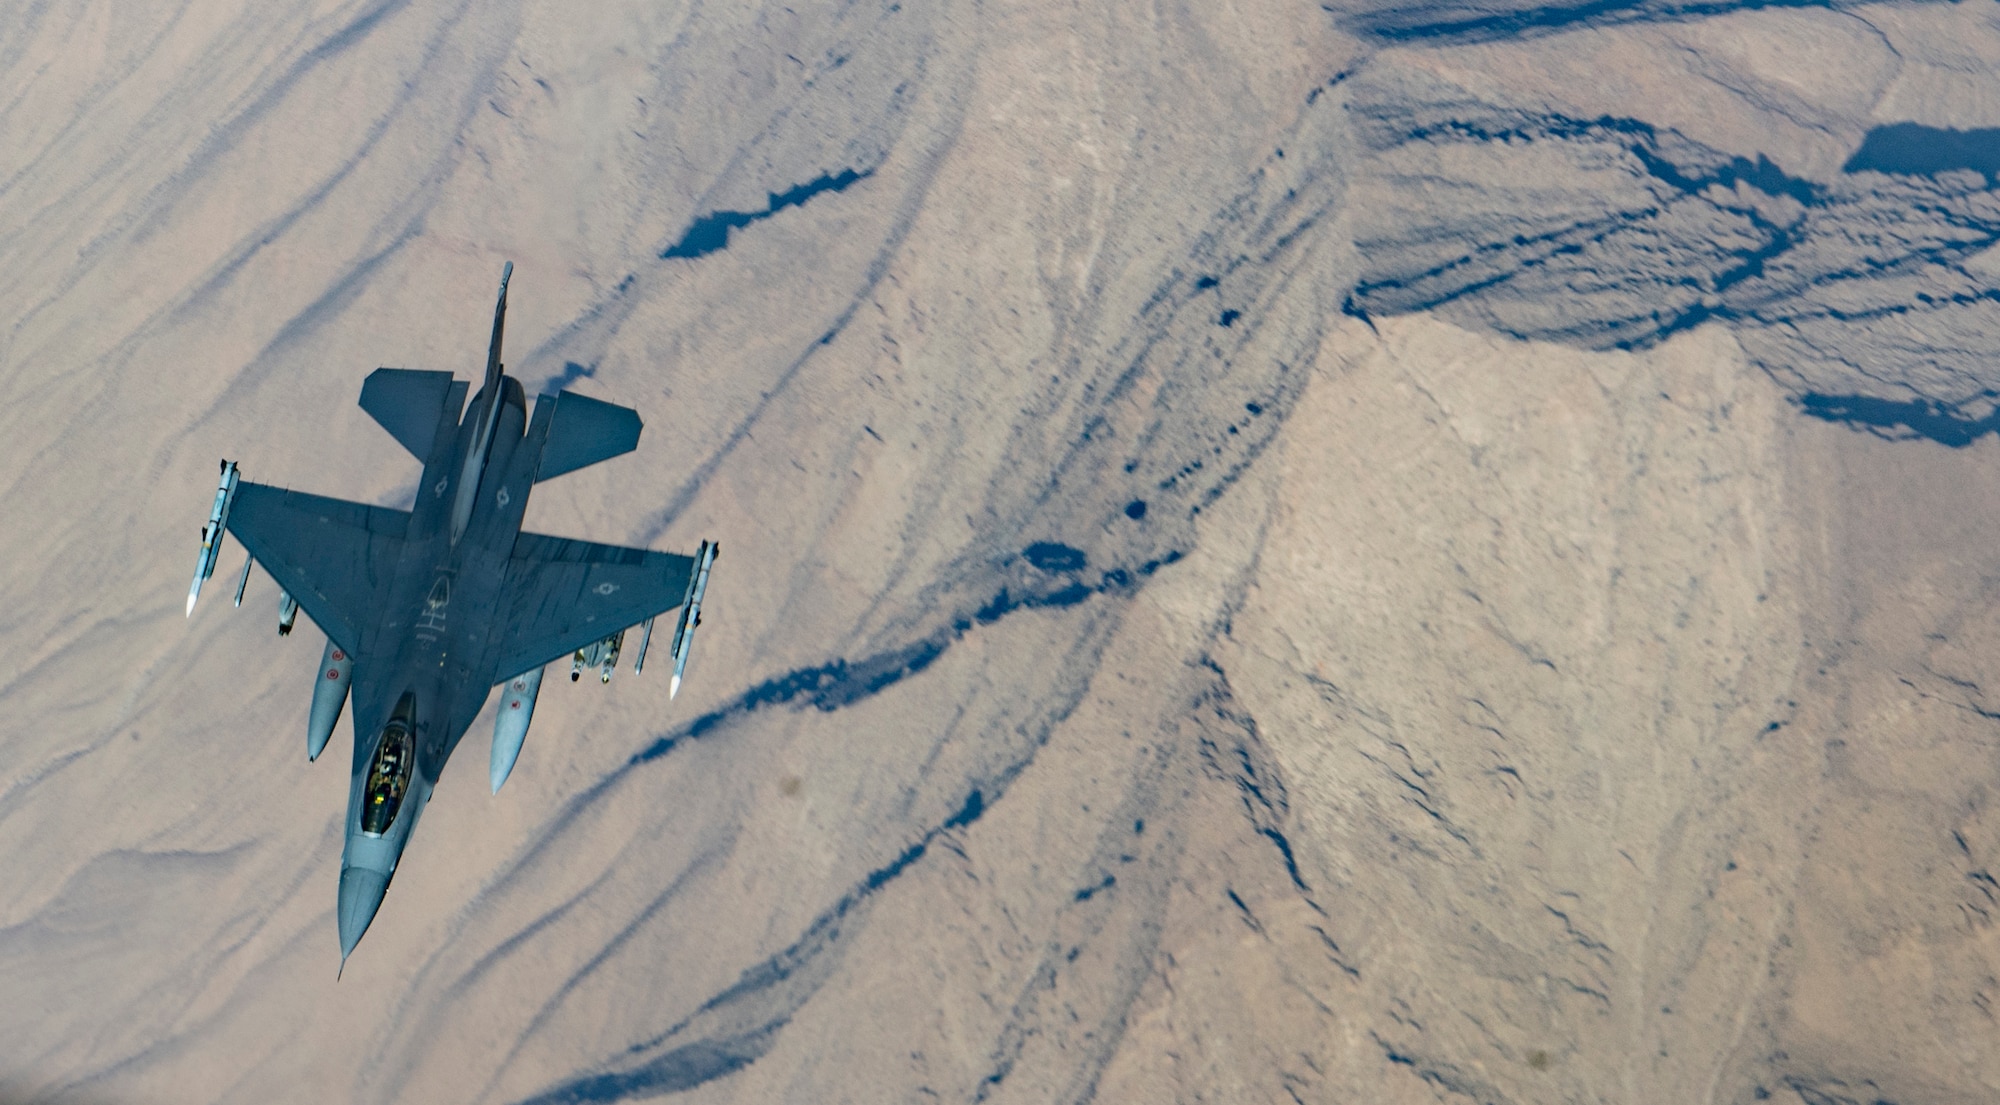 A U.S. Air Force F-16 Fighting Falcon breaks away after being refueling by a KC-135 Stratotanker from the 340th Expeditionary Air Refueling Squadron over Afghanistan, Jan. 21, 2019. The 340 EARS maintain a 24/7 presence in the U.S. Central Command area of responsibility, supporting U.S. and coalition aircraft in various operations in countries such as Iraq, Syria and Afghanistan. (U.S. Air Force Photo by Staff Sgt. Clayton Cupit)